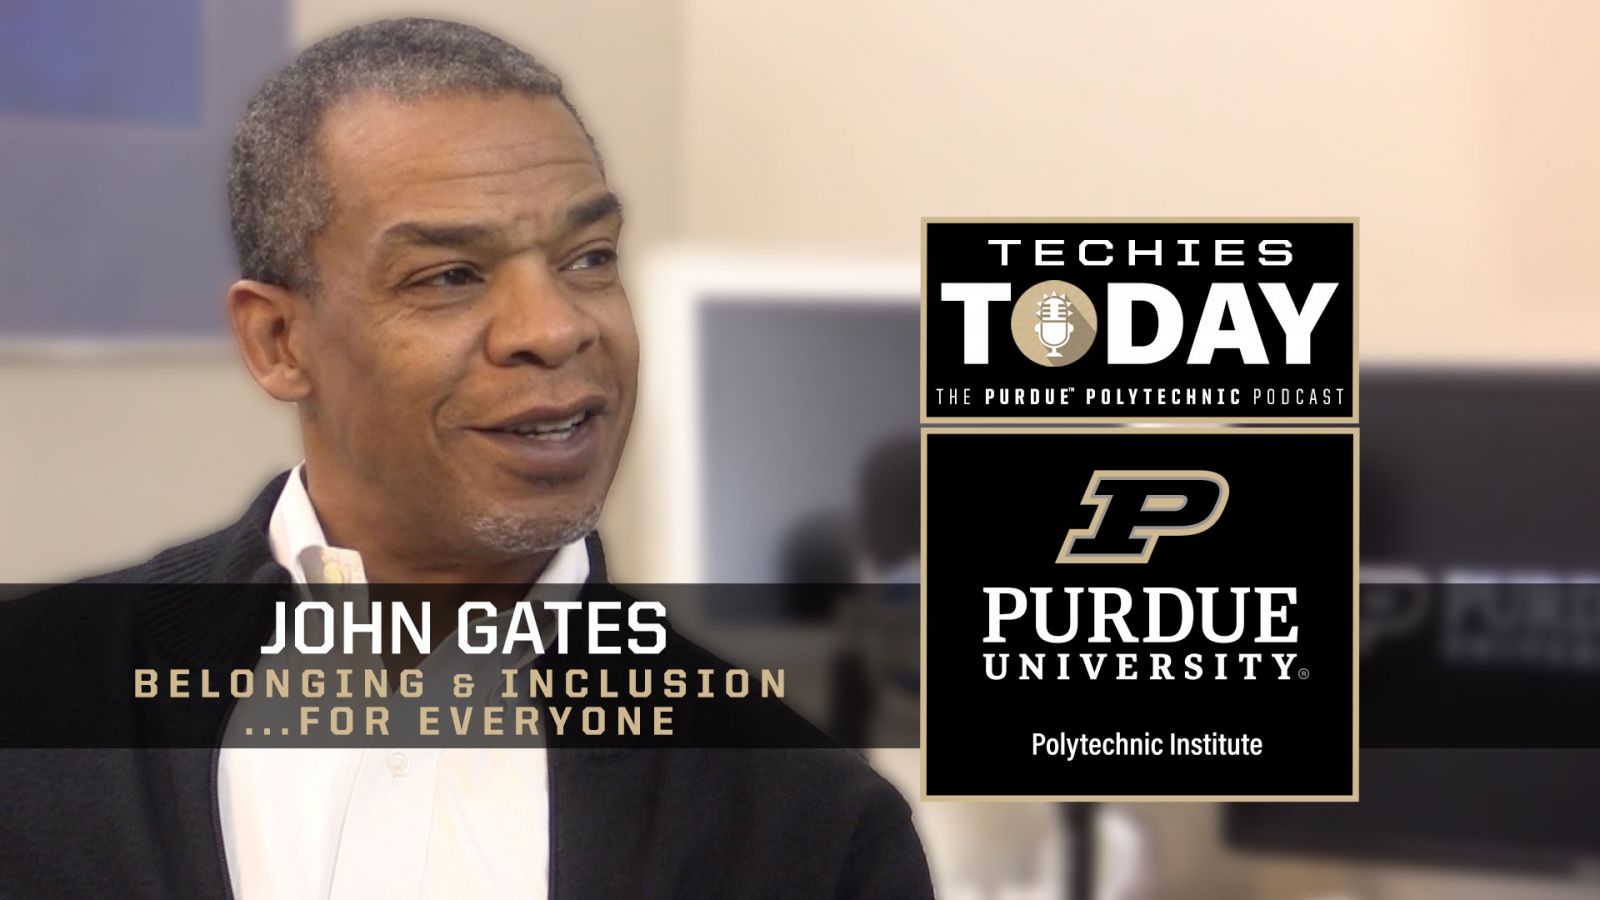 John Gates, Belonging & Inclusion for Everyone, on Techies Today, the Purdue Polytechnic Podcast